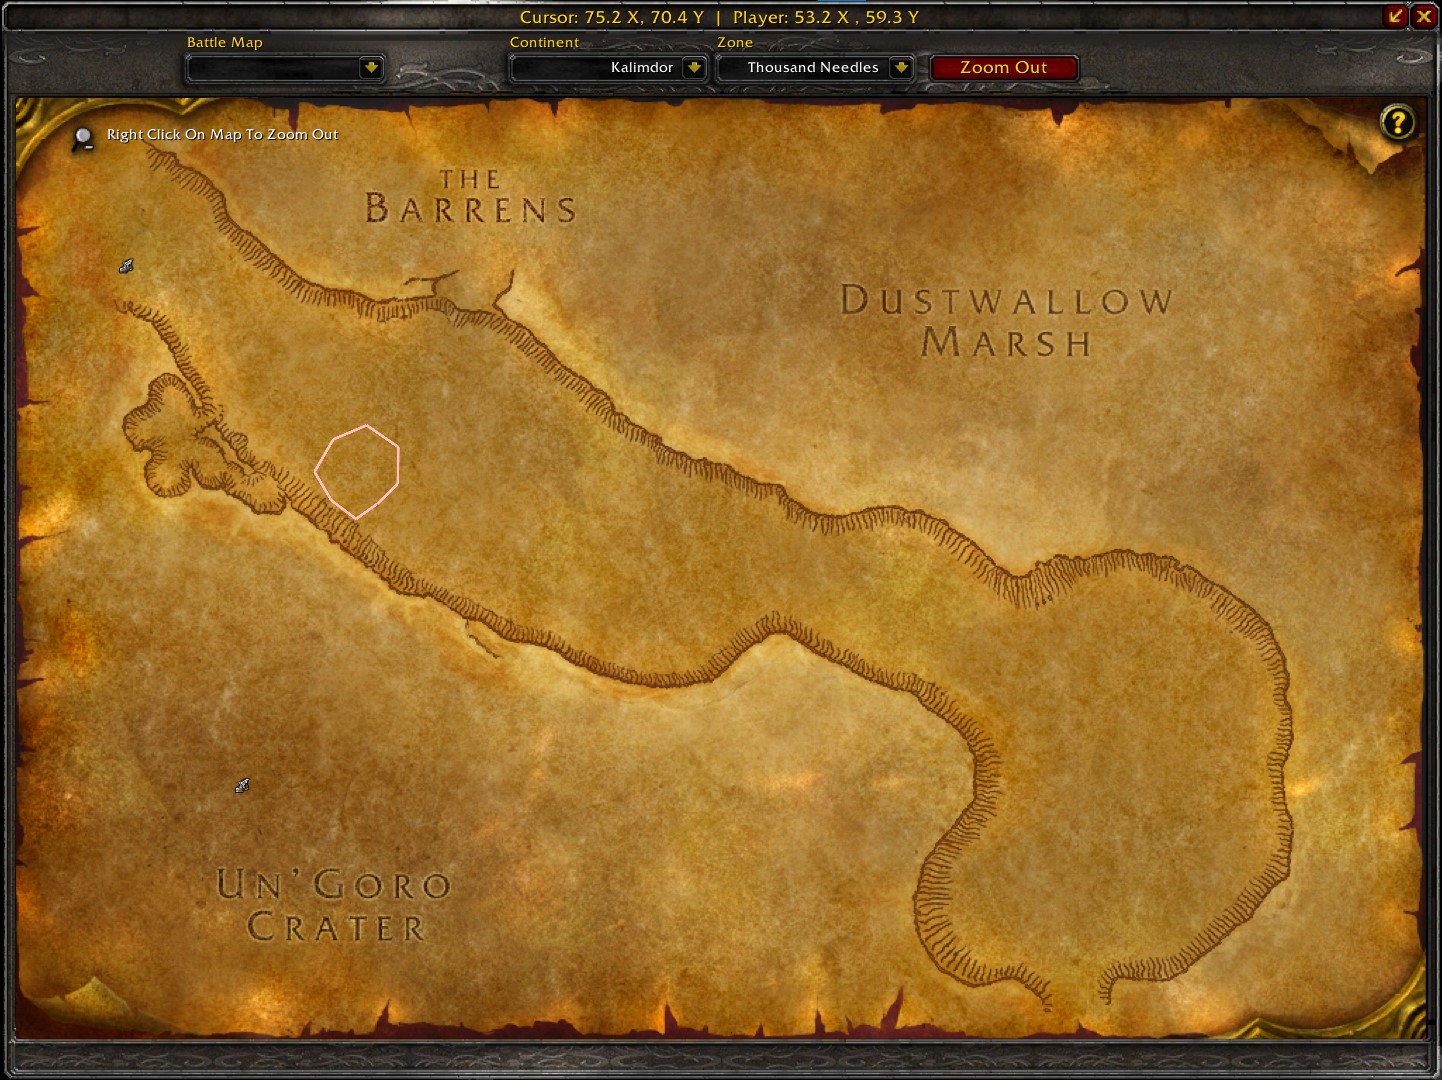 A map of World of Warcraft showing a route for heavy leather farming in the Barrens. The route starts at the flight point in Crossroads and loops around the zone, passing through various areas with high concentrations of mobs that drop heavy leather, such as the Razormane Grounds and the Dustwallow Marsh border.